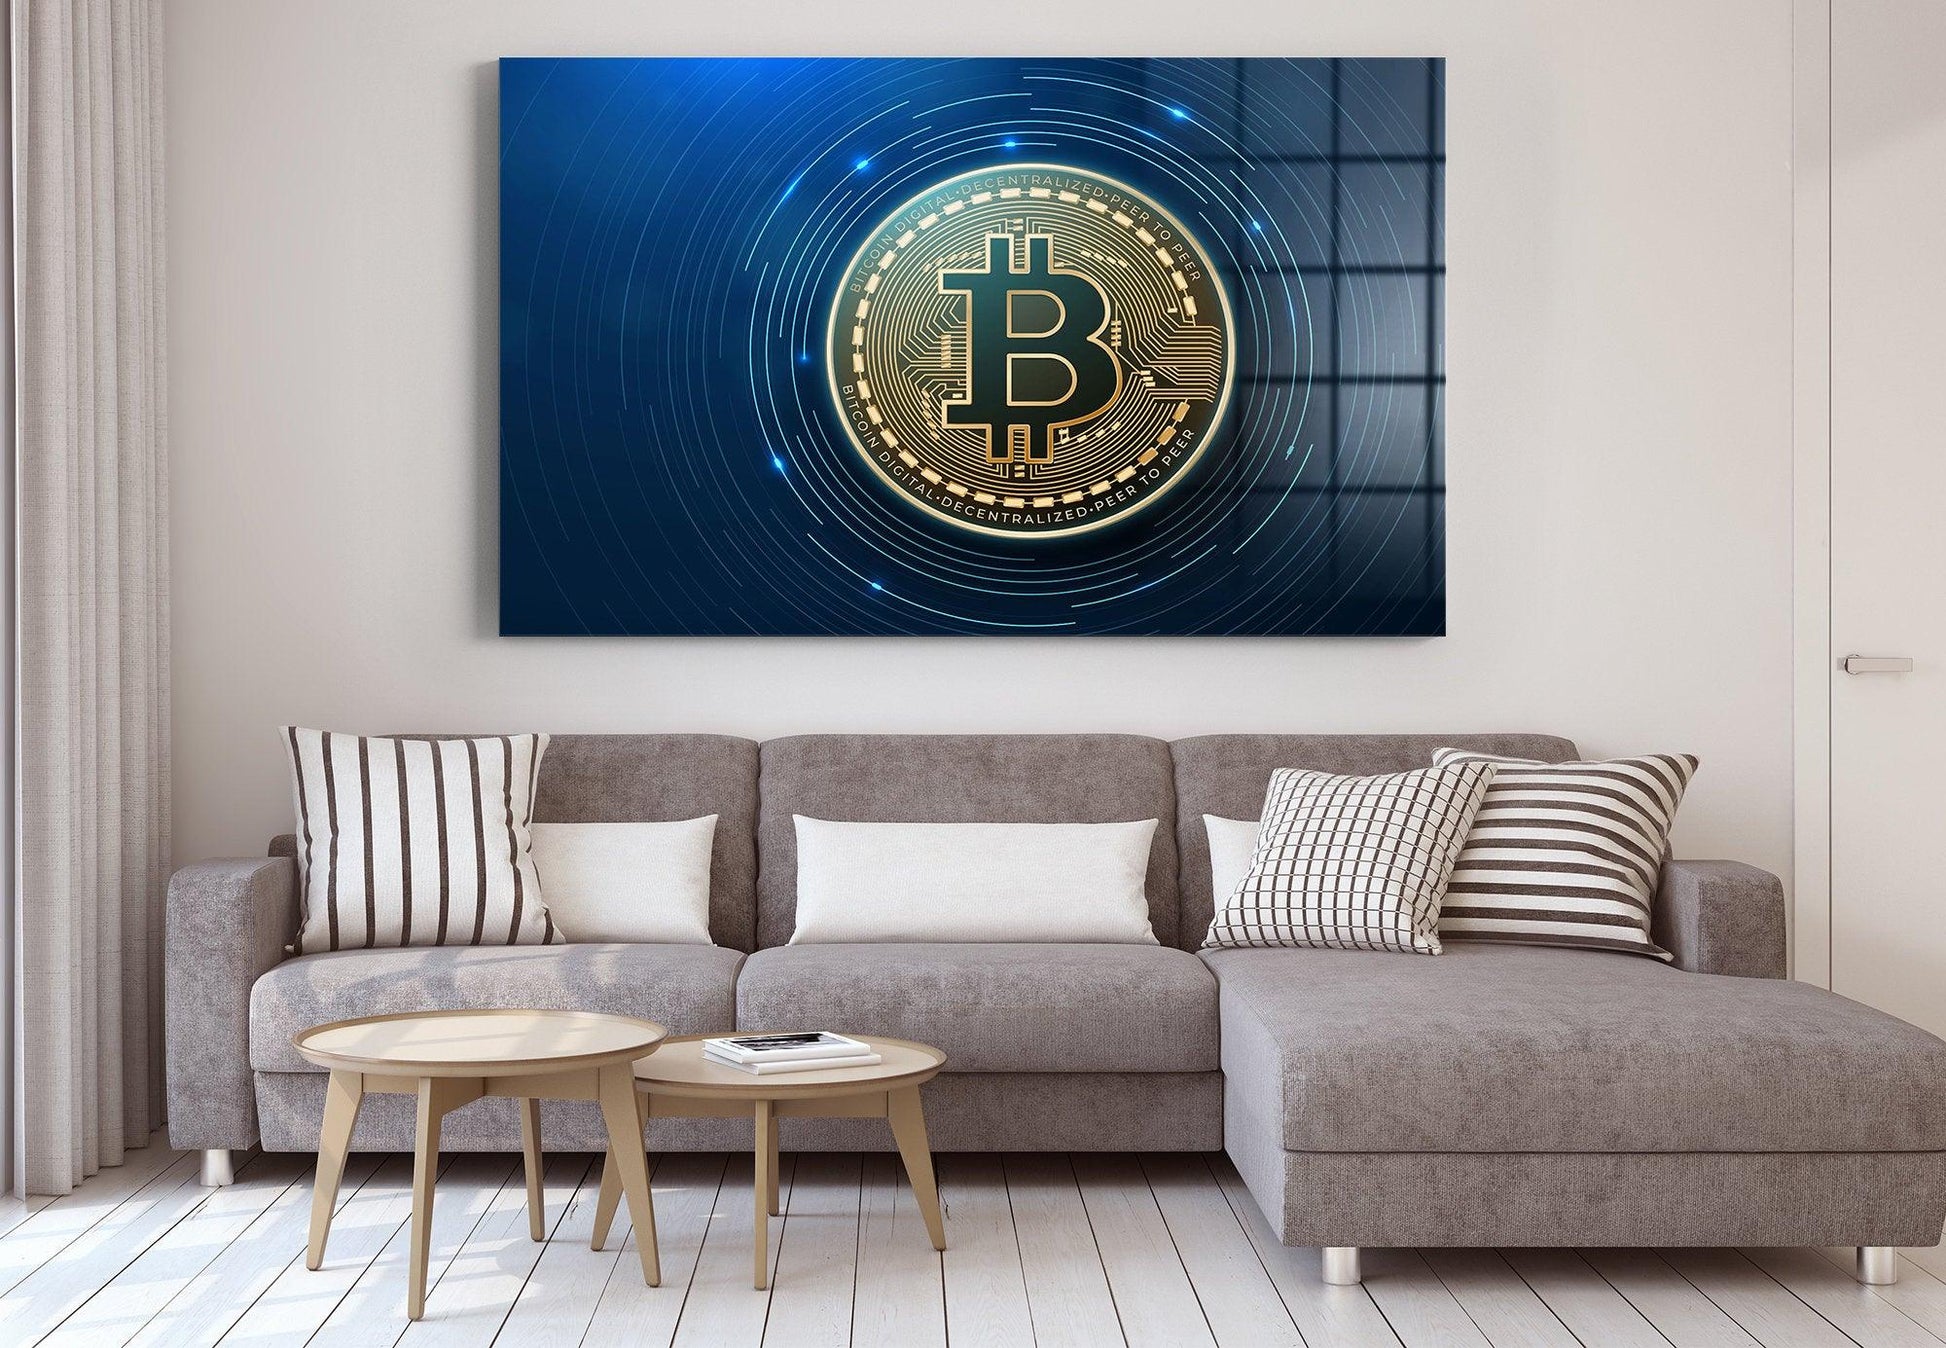 Large Bitcoin Canvas Art, Cryptocurrency Trader Gift, Bitcoin Wall Decor, Bitcoin canvas wall art, Bitcoin glass wall decor, office wall art - TrendiArt